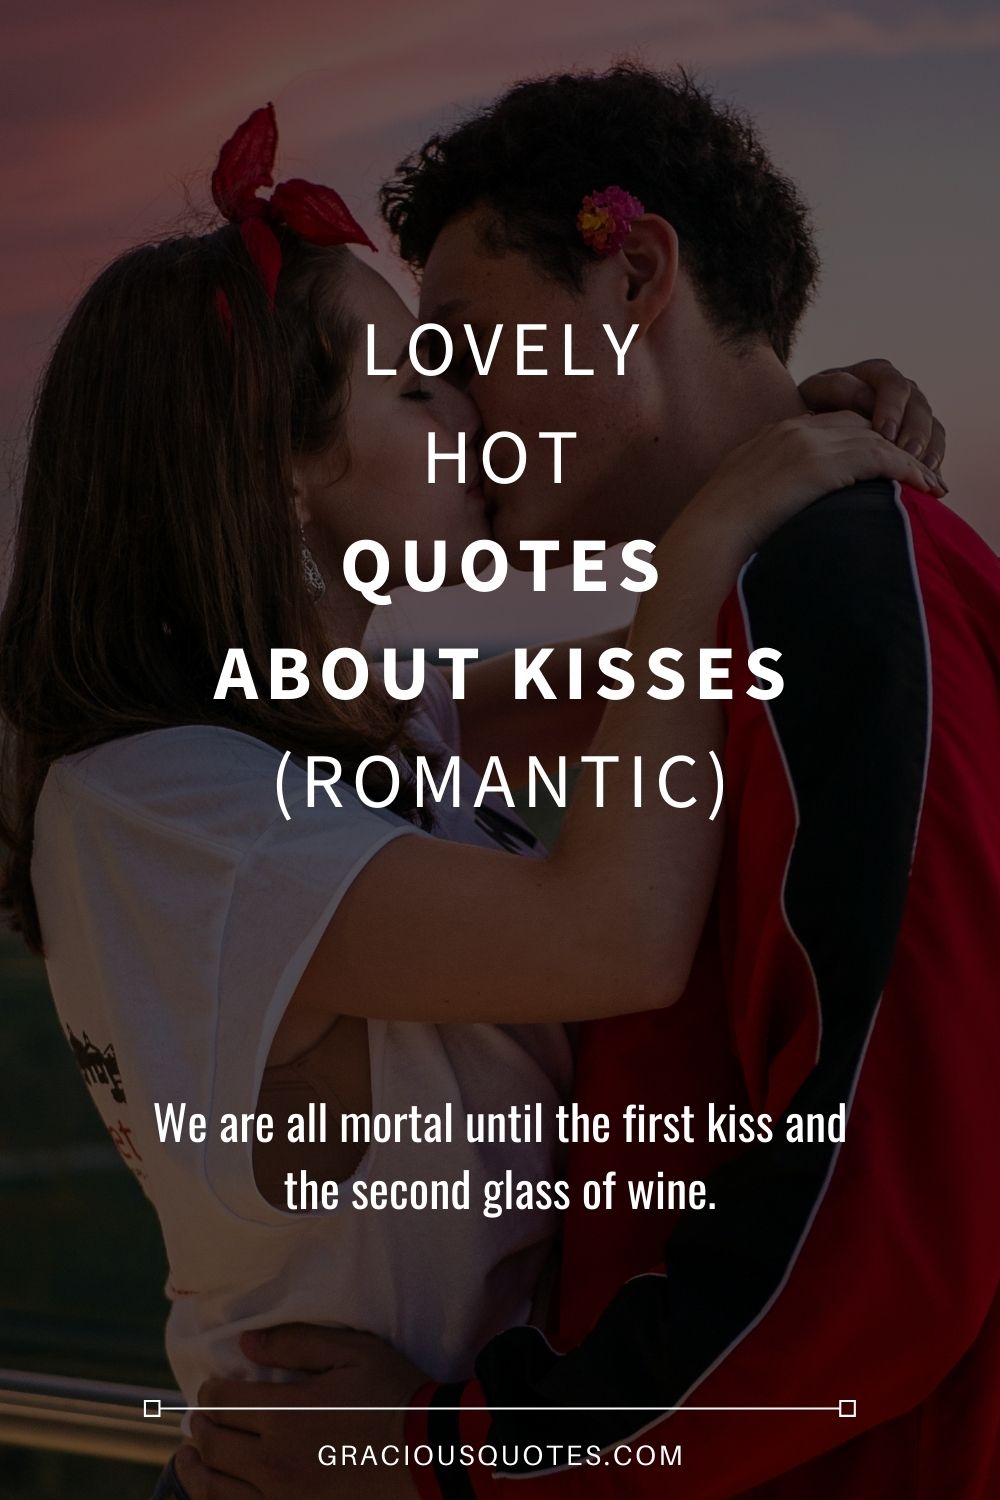 66 Lovely Hot Quotes About Kisses (ROMANTIC)